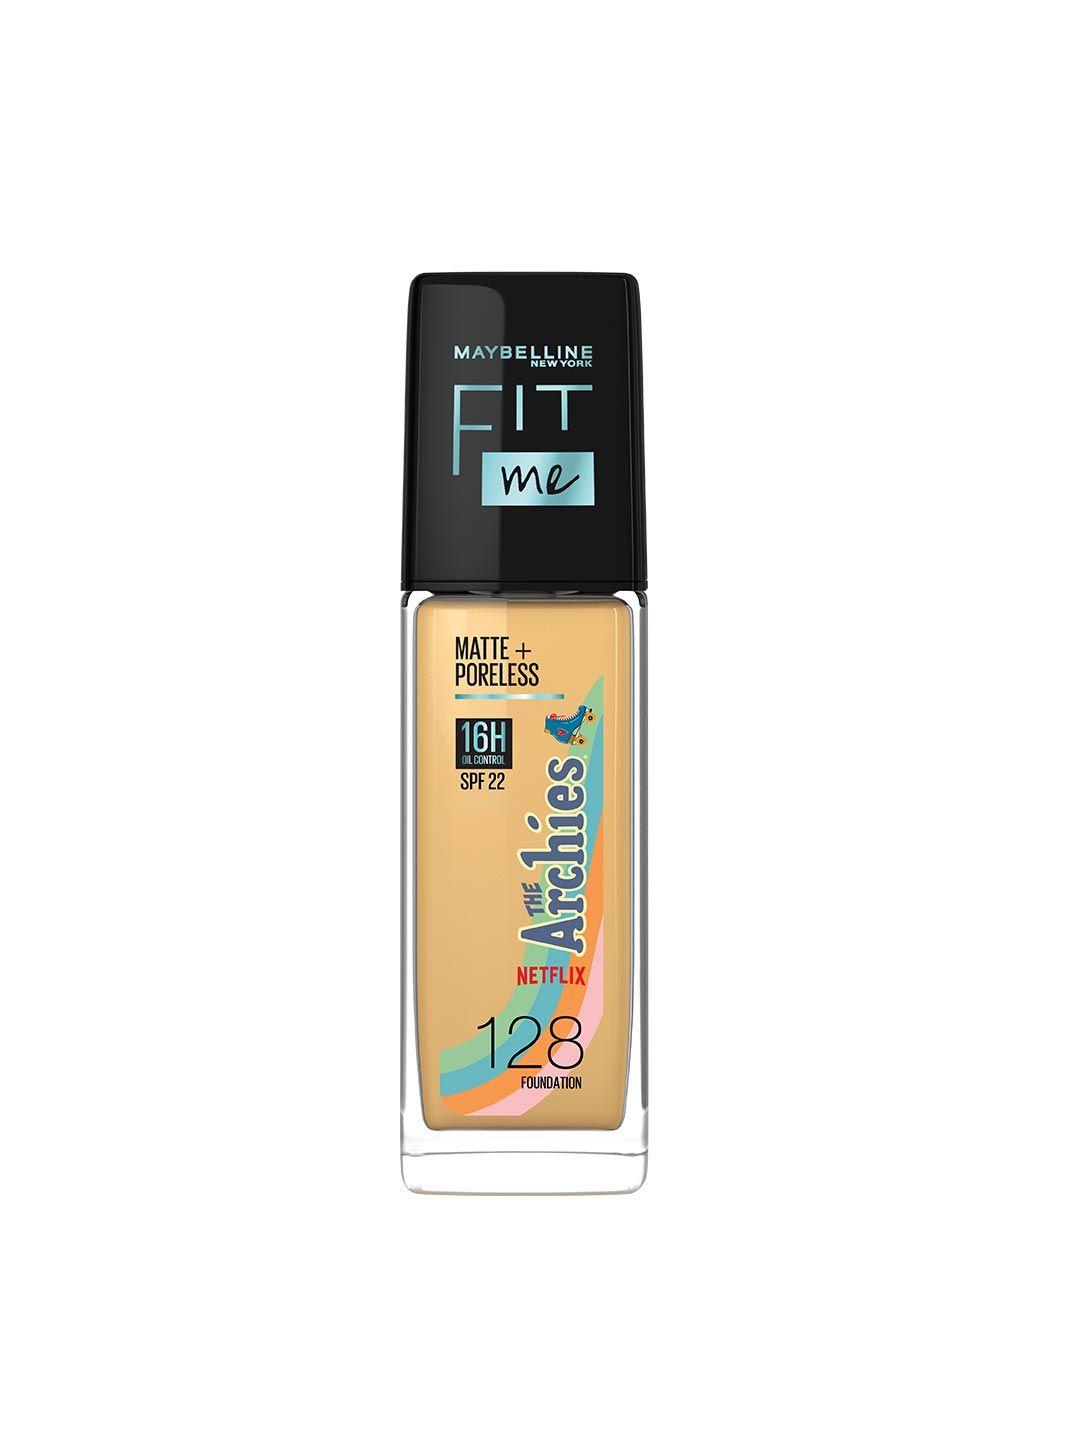 maybelline-new-york-the-archies-collection-fit-me-matte+poreless-foundation-30ml-shade-128